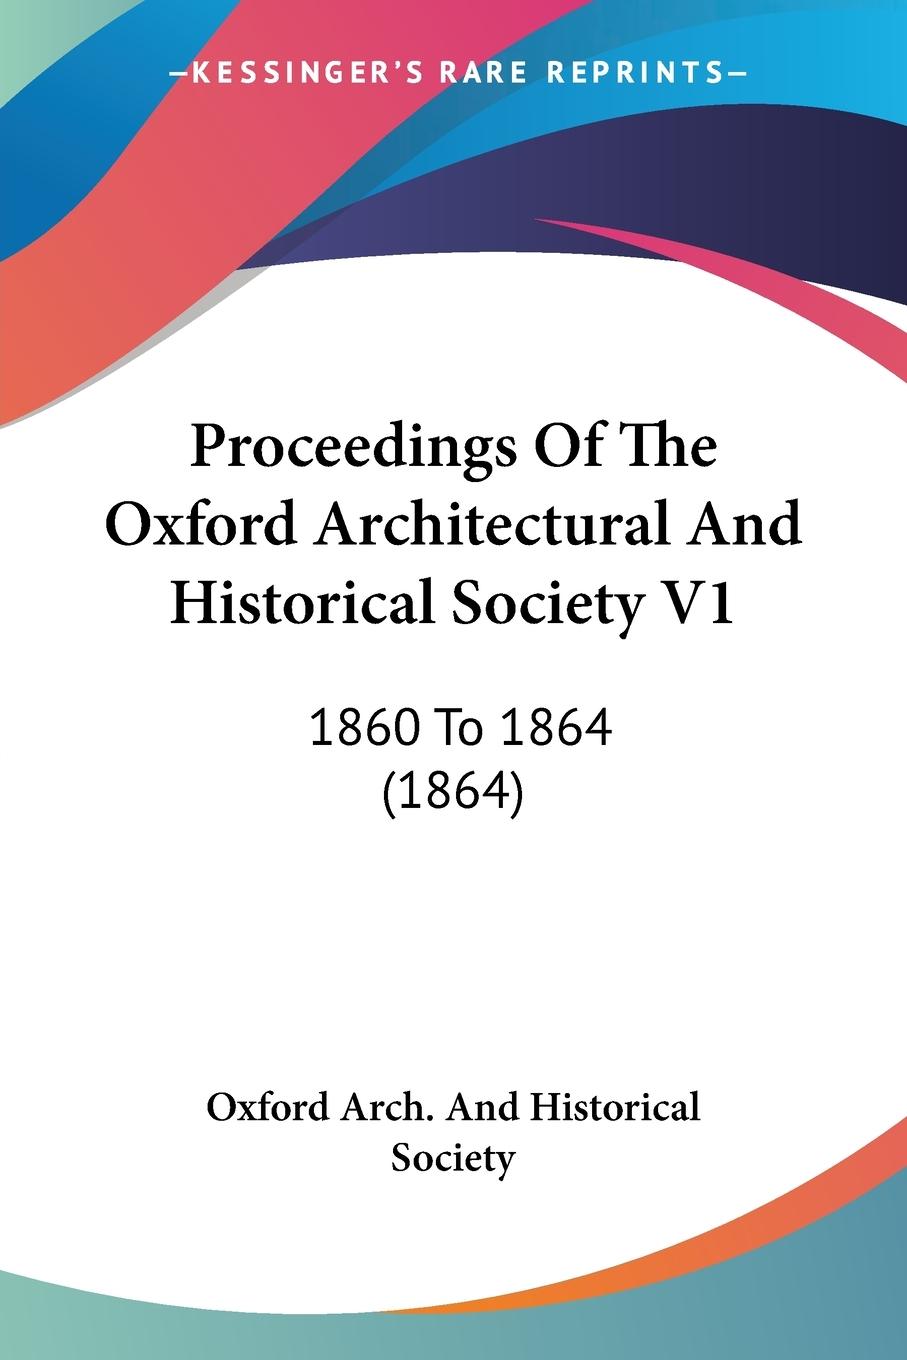 Proceedings Of The Oxford Architectural And Historical Society V1 - Oxford Arch. And Historical Society